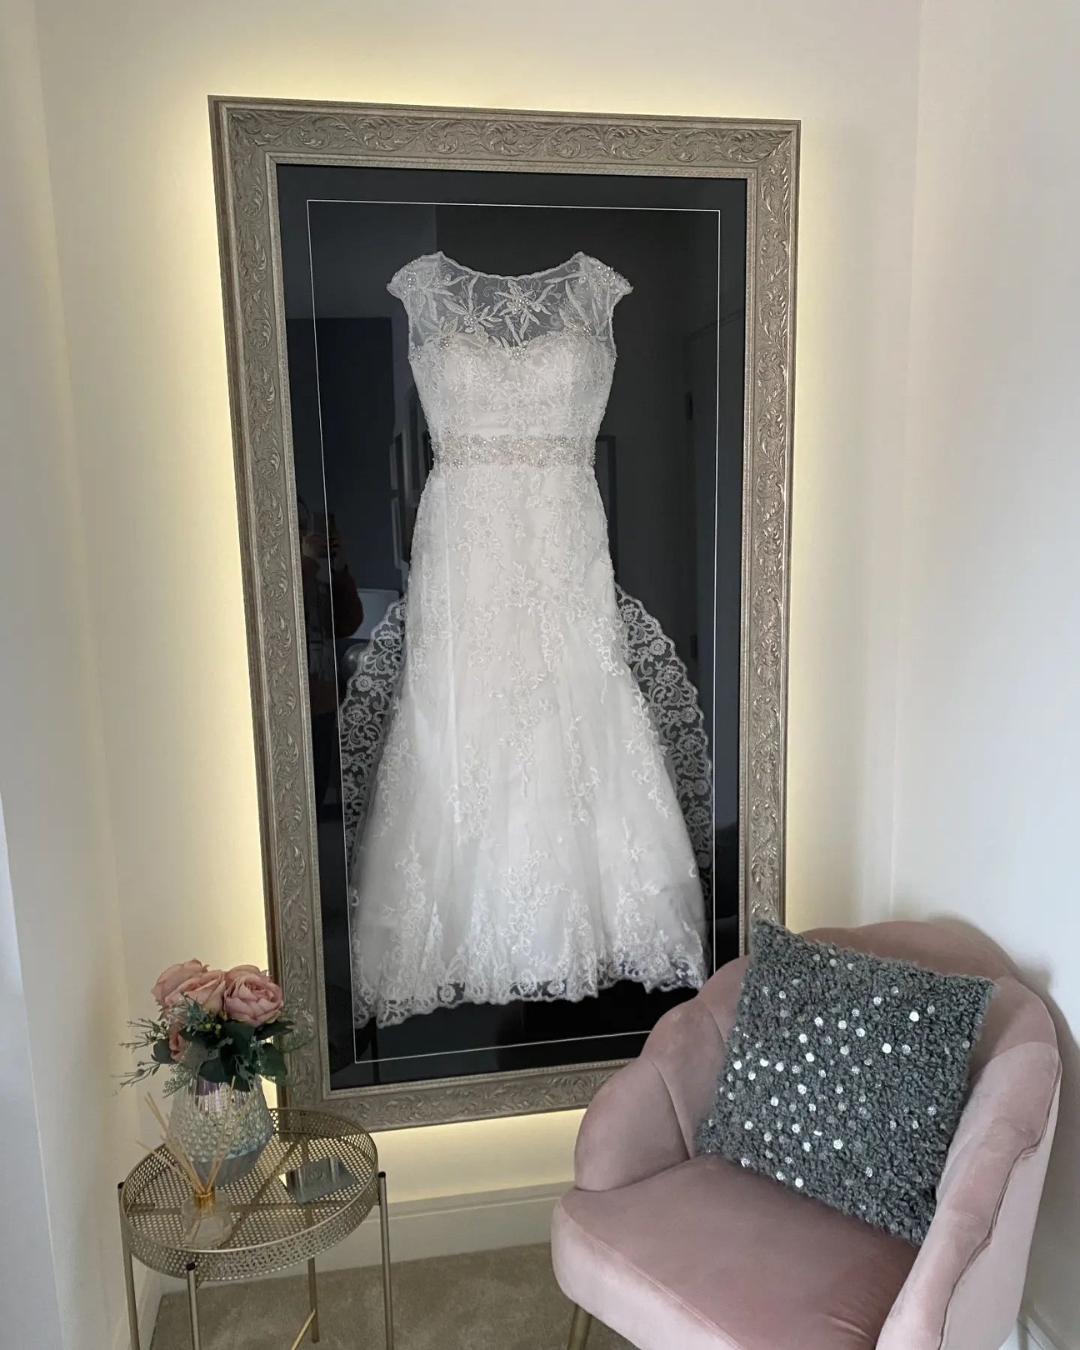 framed wedding dress displayed as home accessory